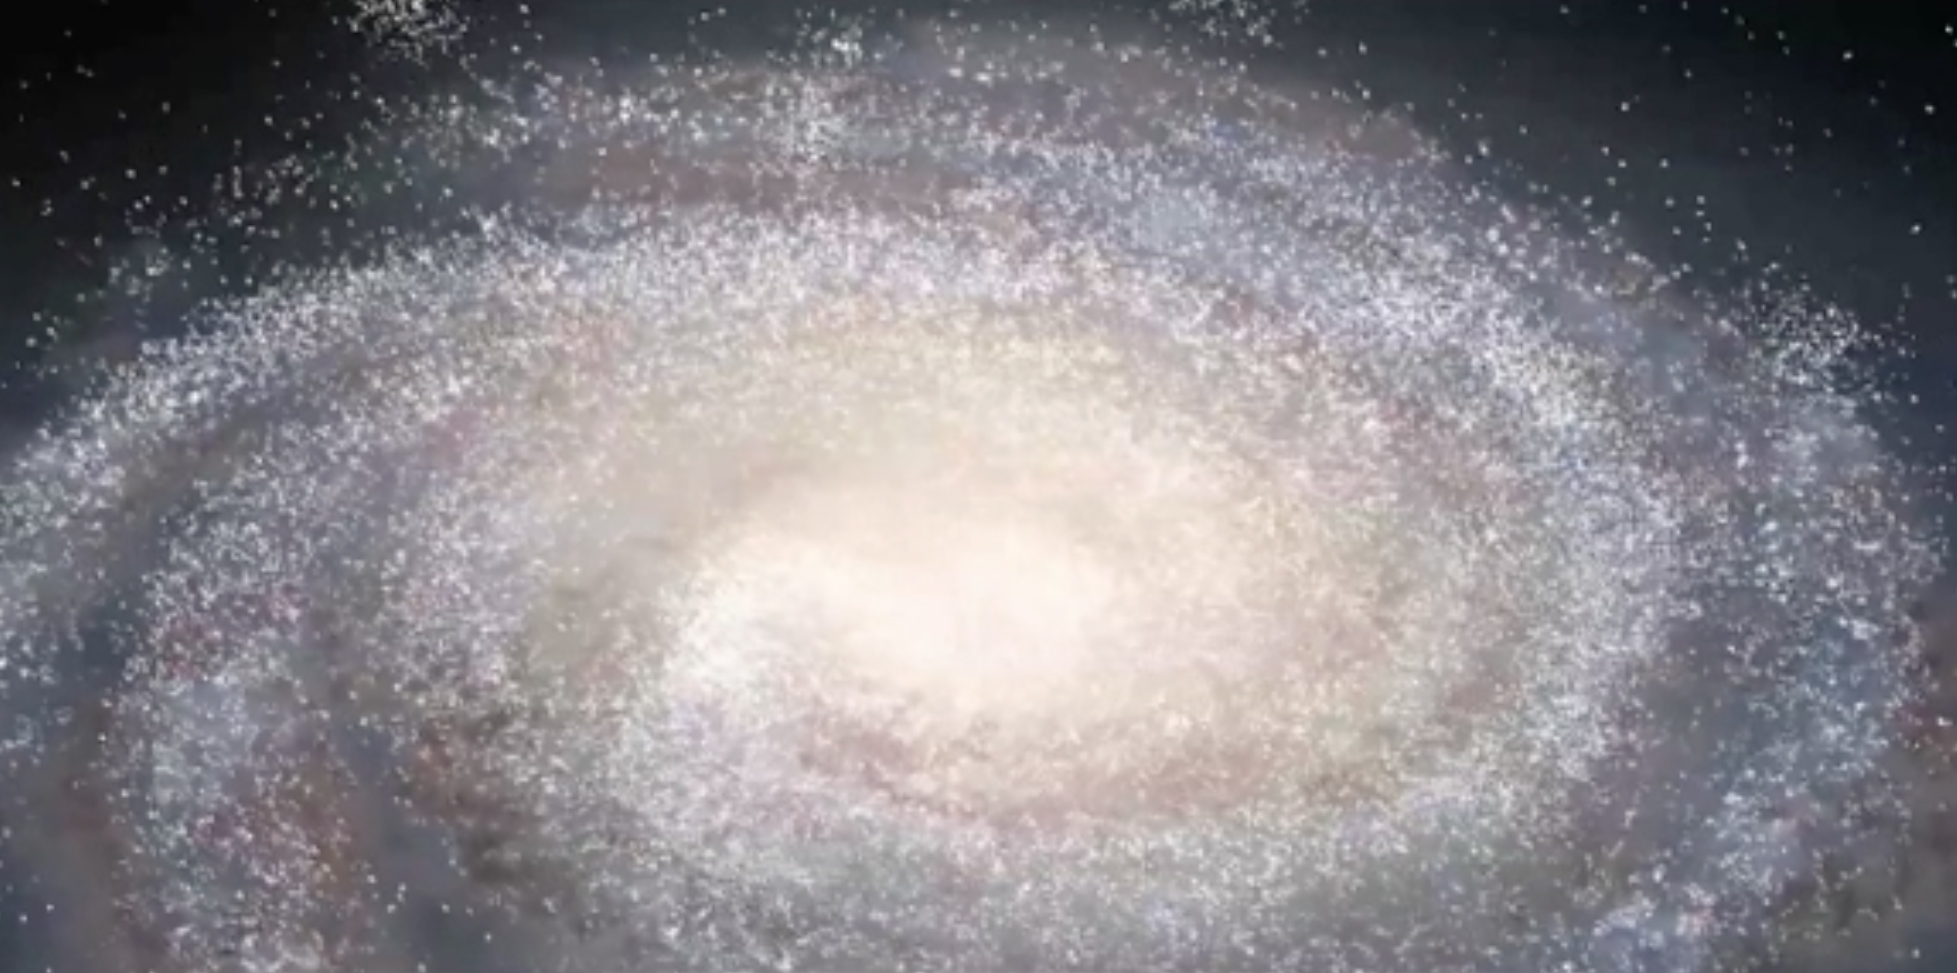 Fig.1: A still photo from an animated flythrough of the Universe using SDSS data. This image shows our Milky Way Galaxy. The galaxy shape is an artist's conception, and each of the small white dots is one of the hundreds of thousands of stars as seen by the SDSS.
